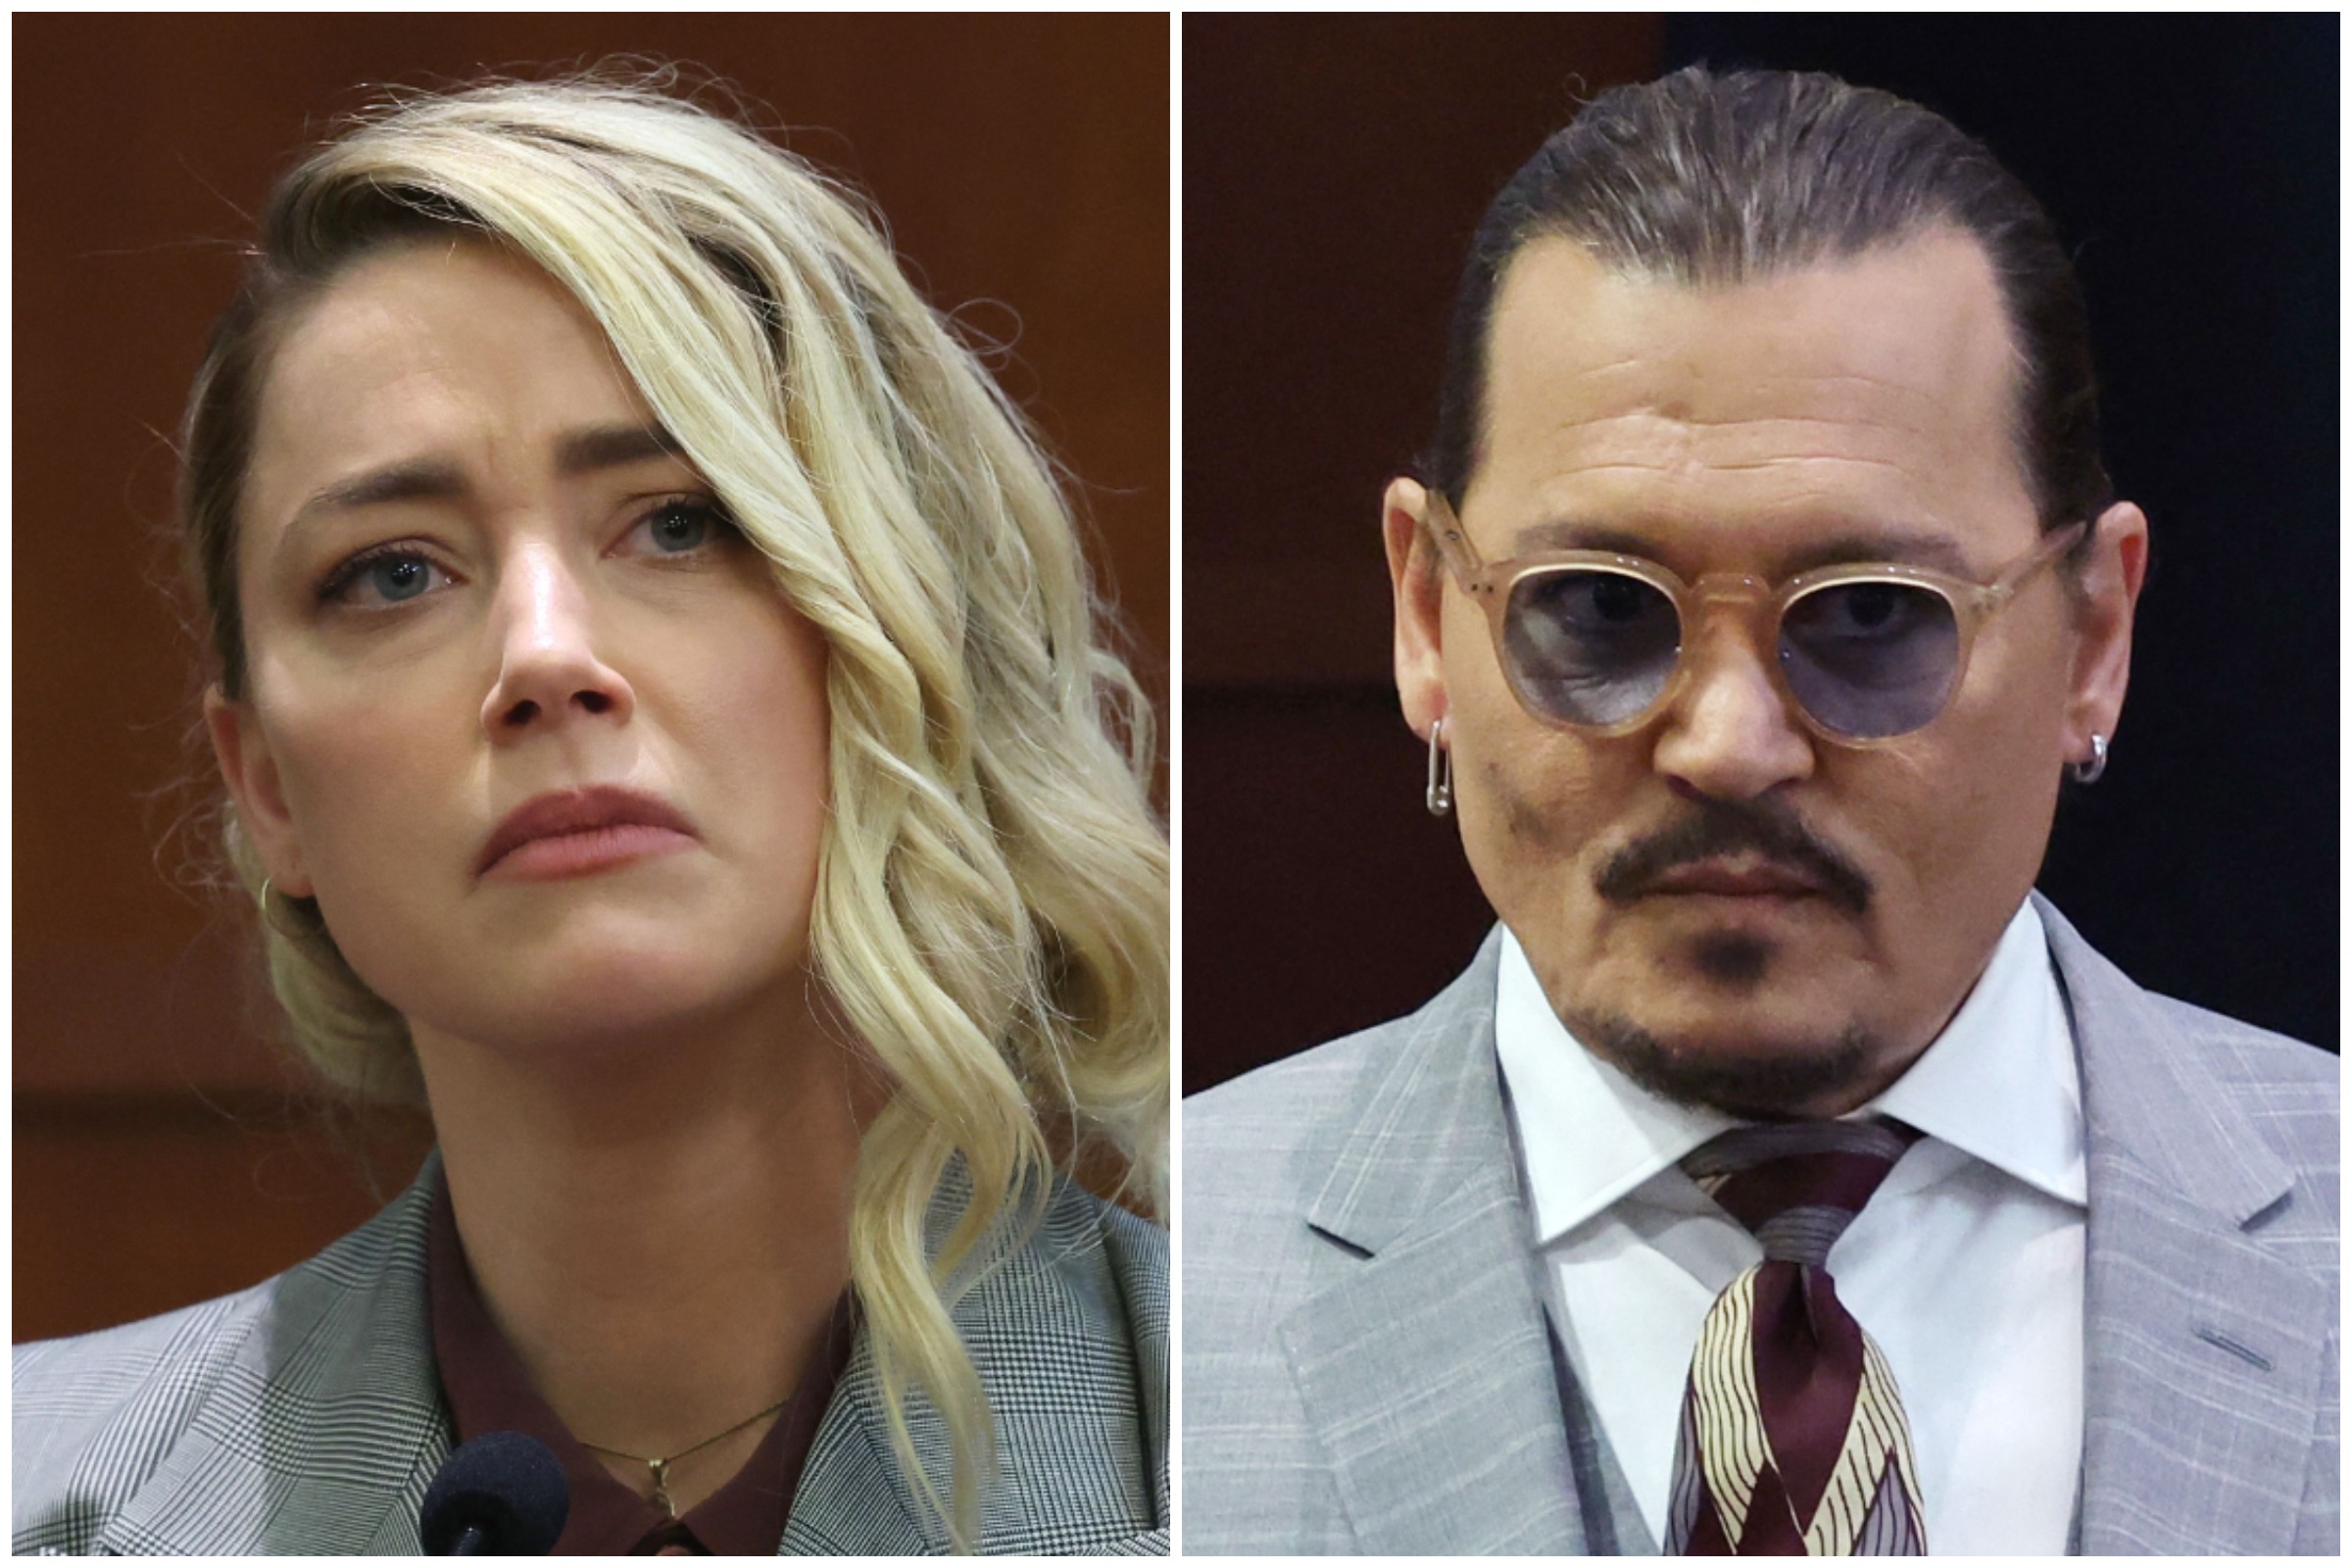 Johnny Depp, Amber Heard Trial Coverage If No Friday Verdict, Jury to Reconvene After Holiday